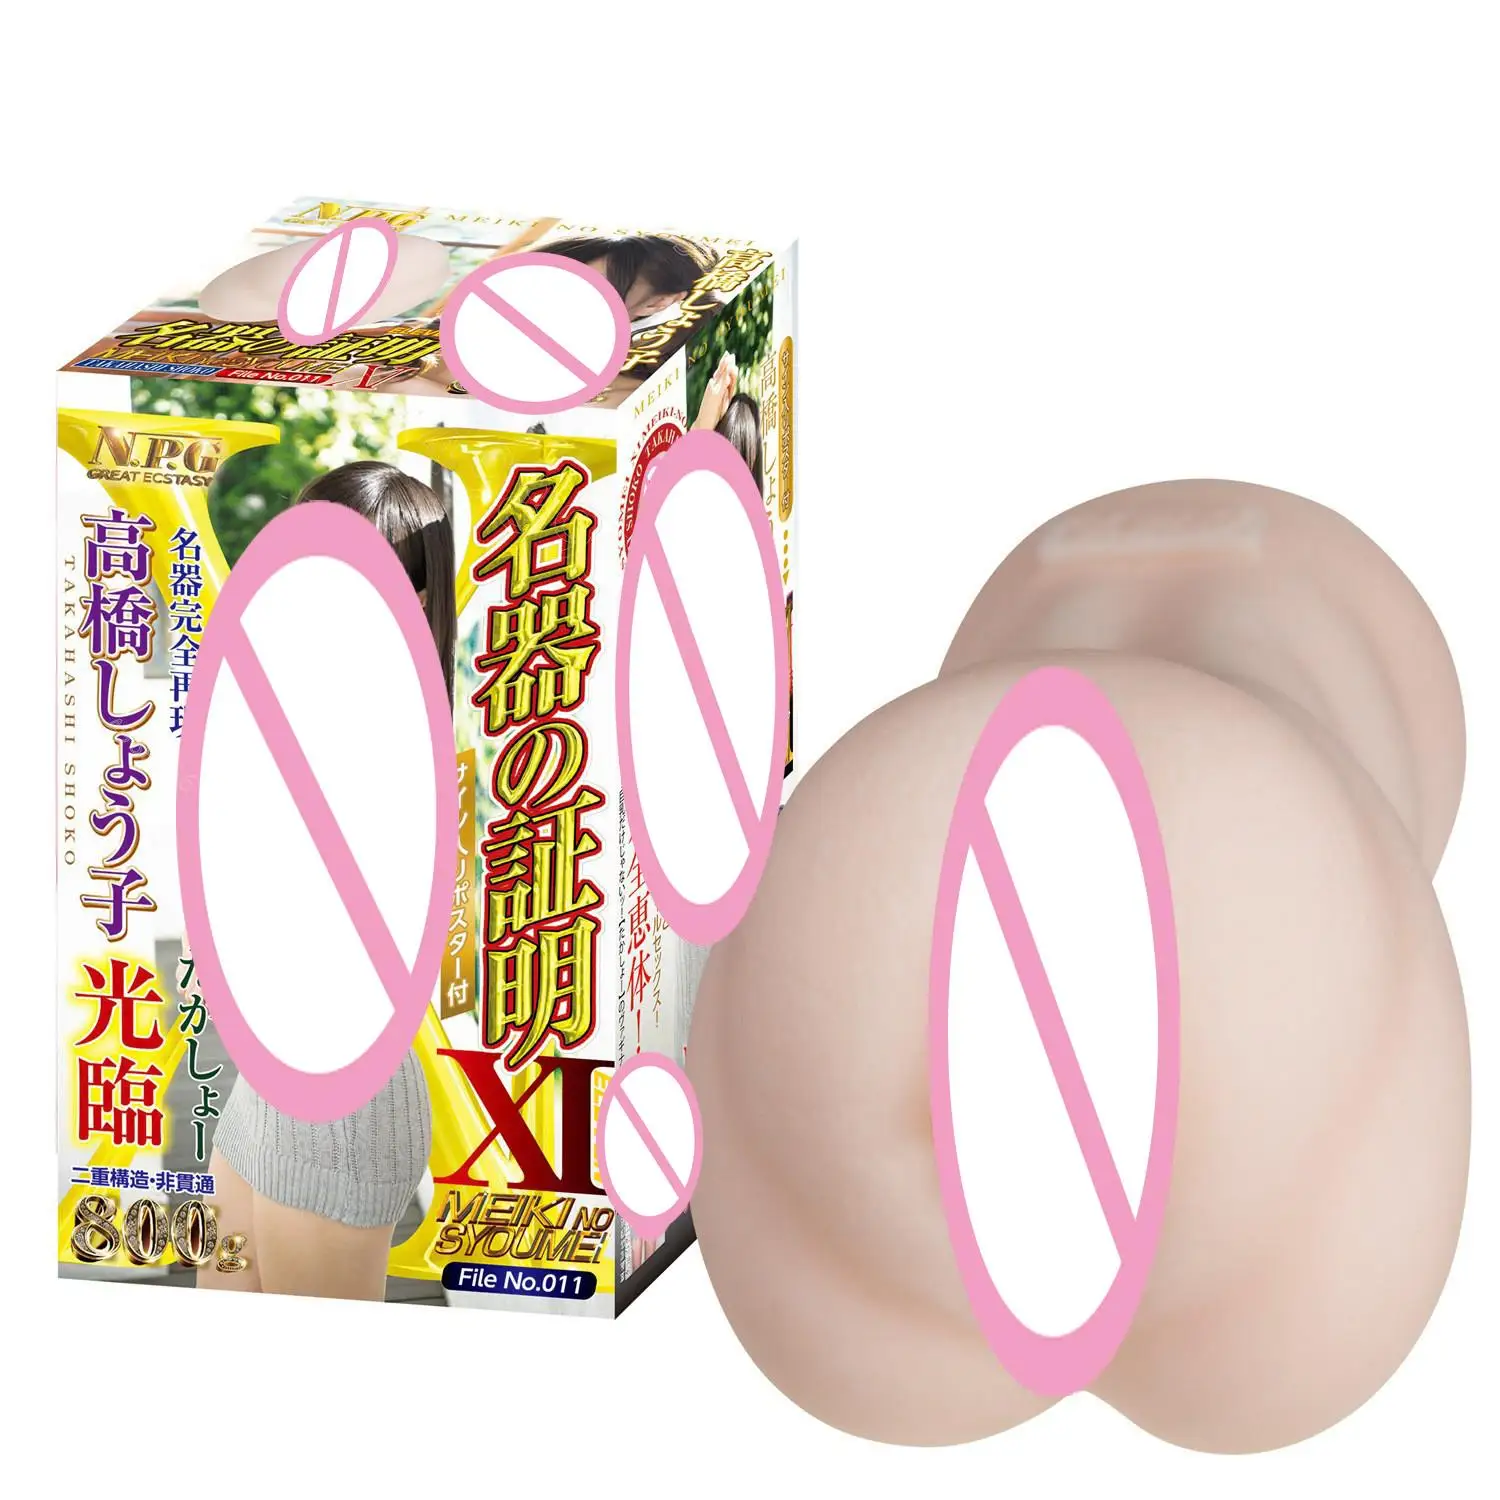 

Japan Masturbator Cup dildos No Syoumei 11 Sex Toys for Men Artificial Vagina Imported NPG Realistic Pocket Pussy Onahole Male